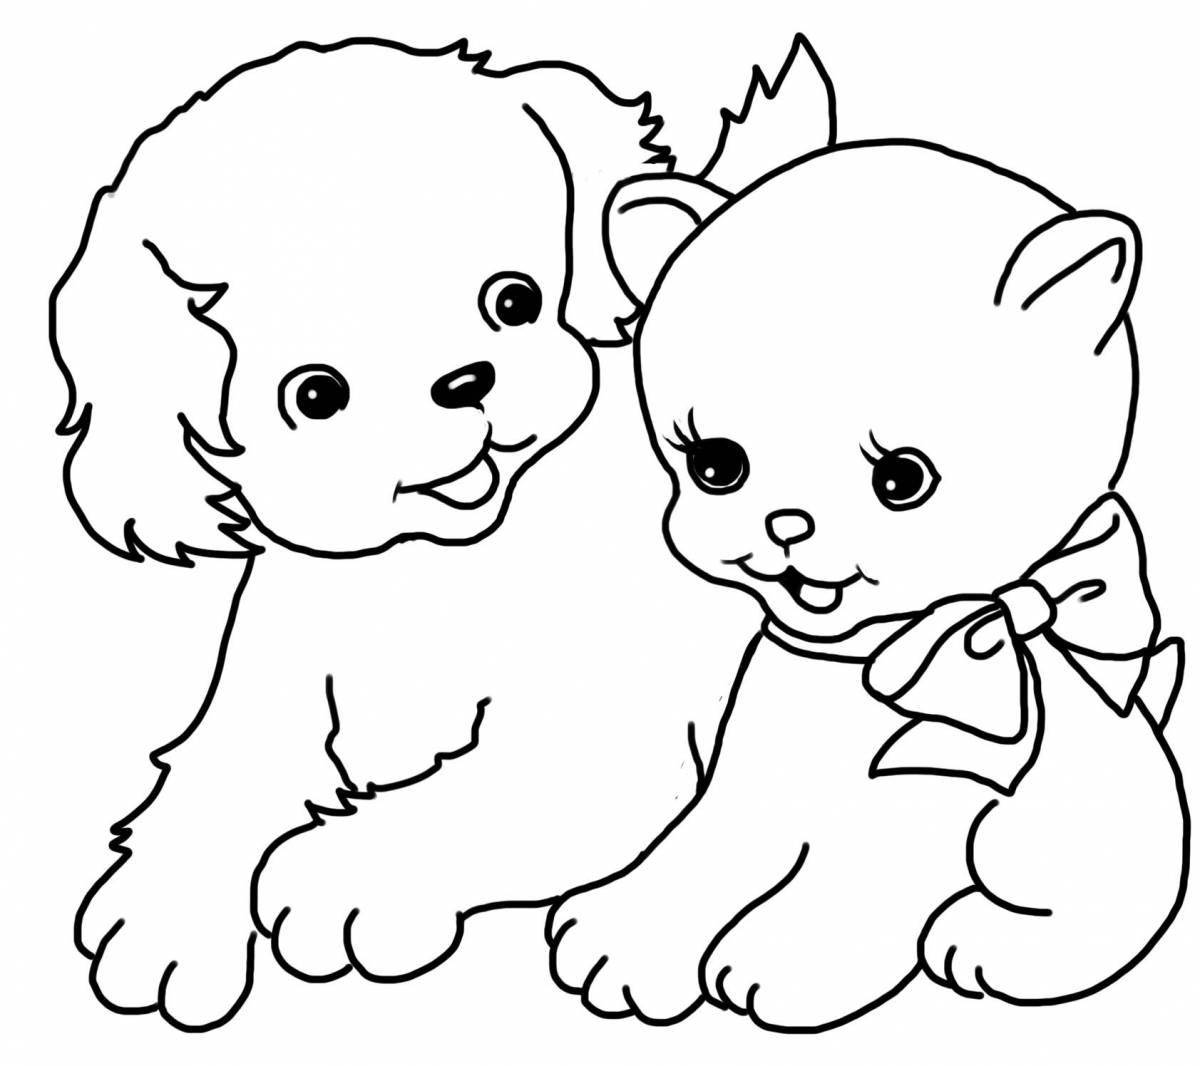 Snuggly coloring cat and dog animals